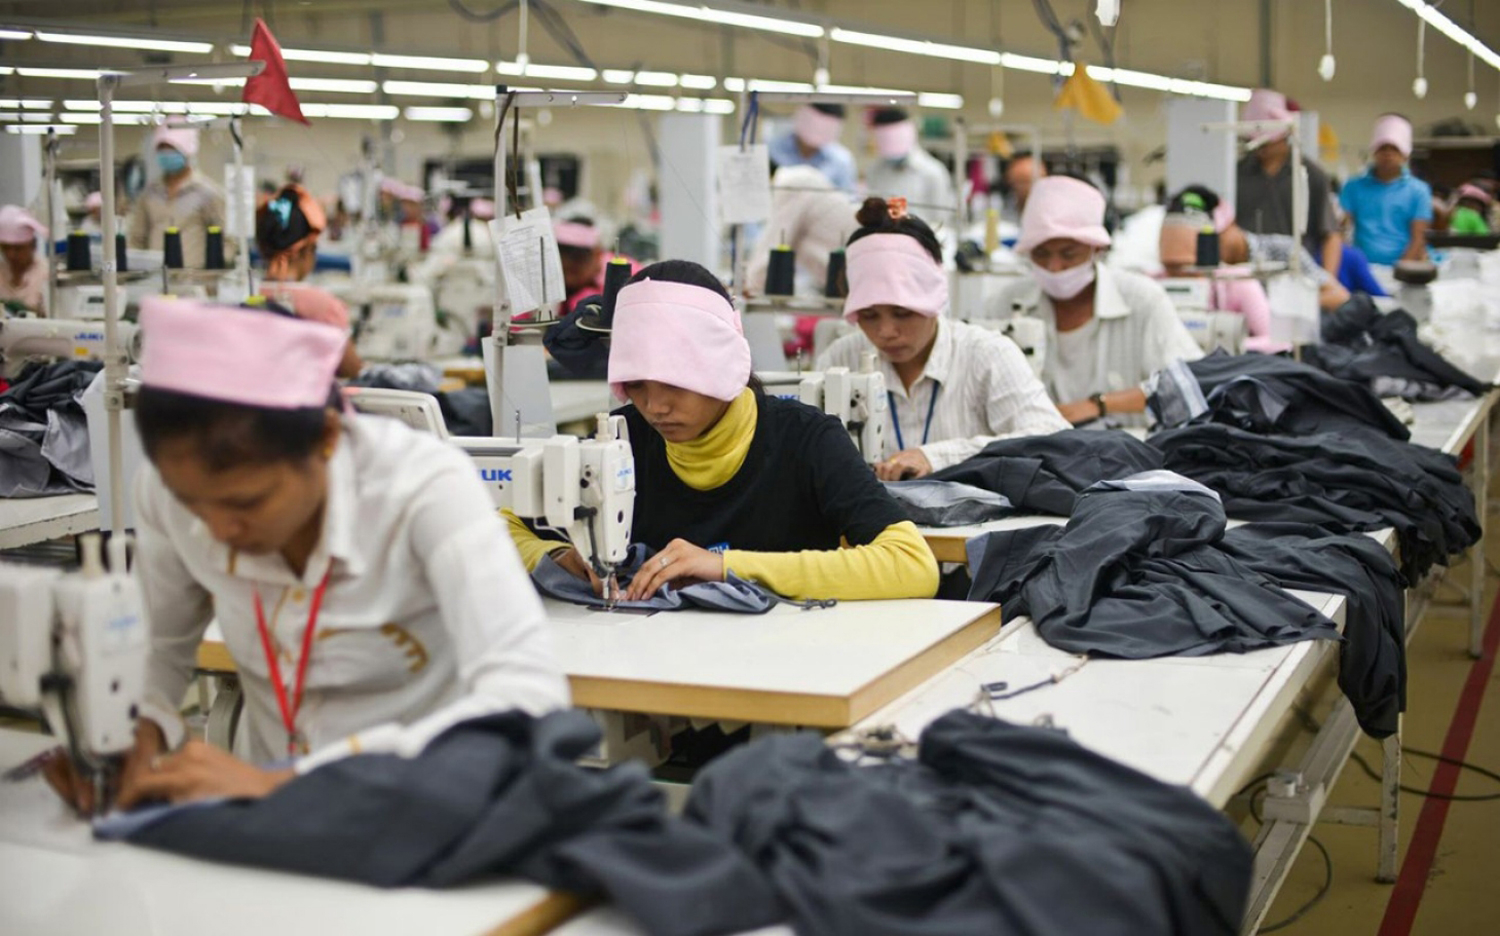 Modern slavery in the fashion industry